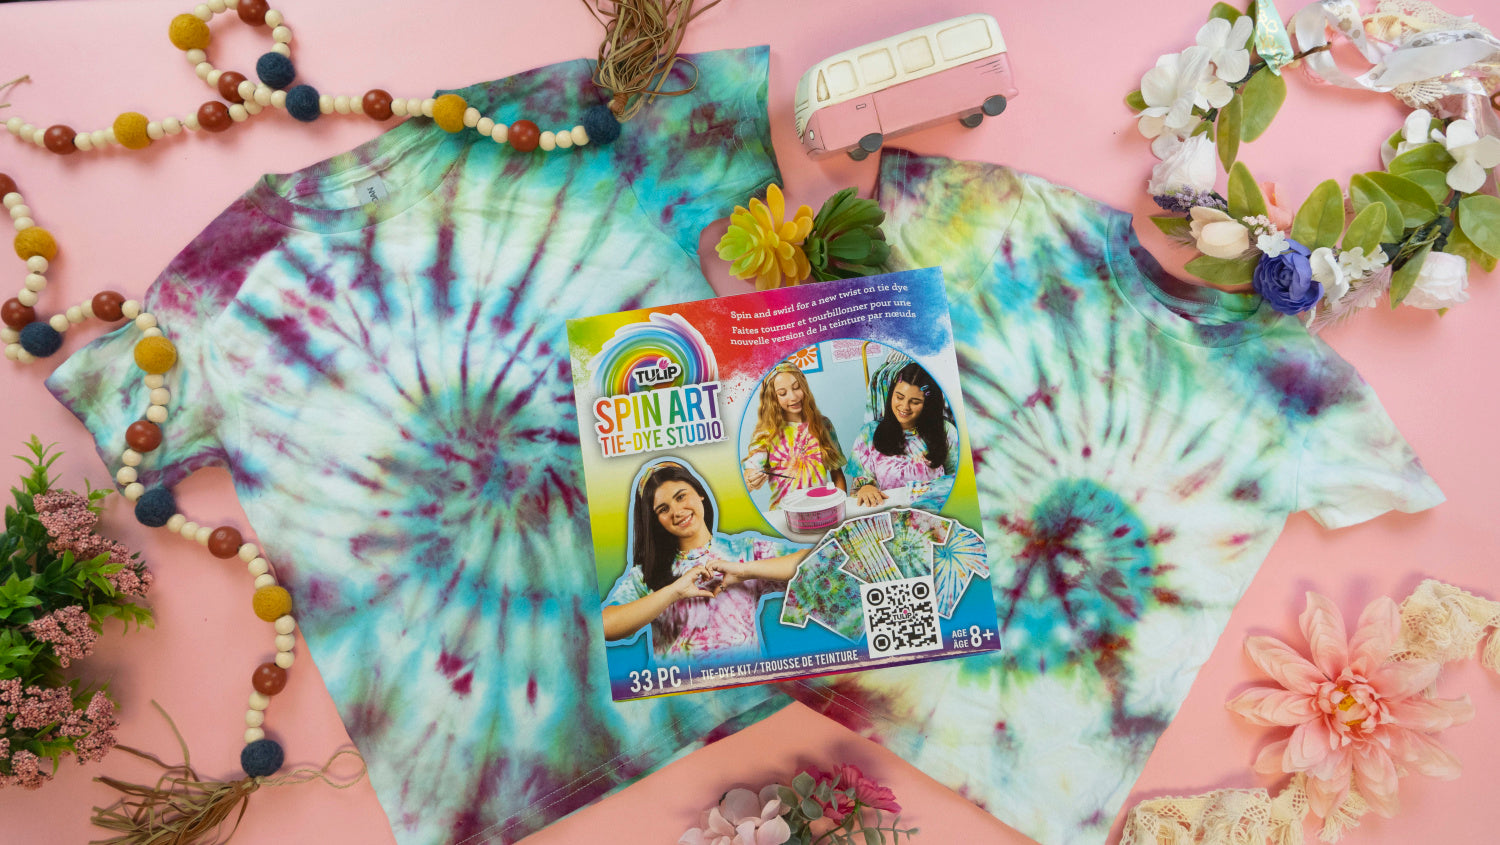 Reveal your spin art tie dye